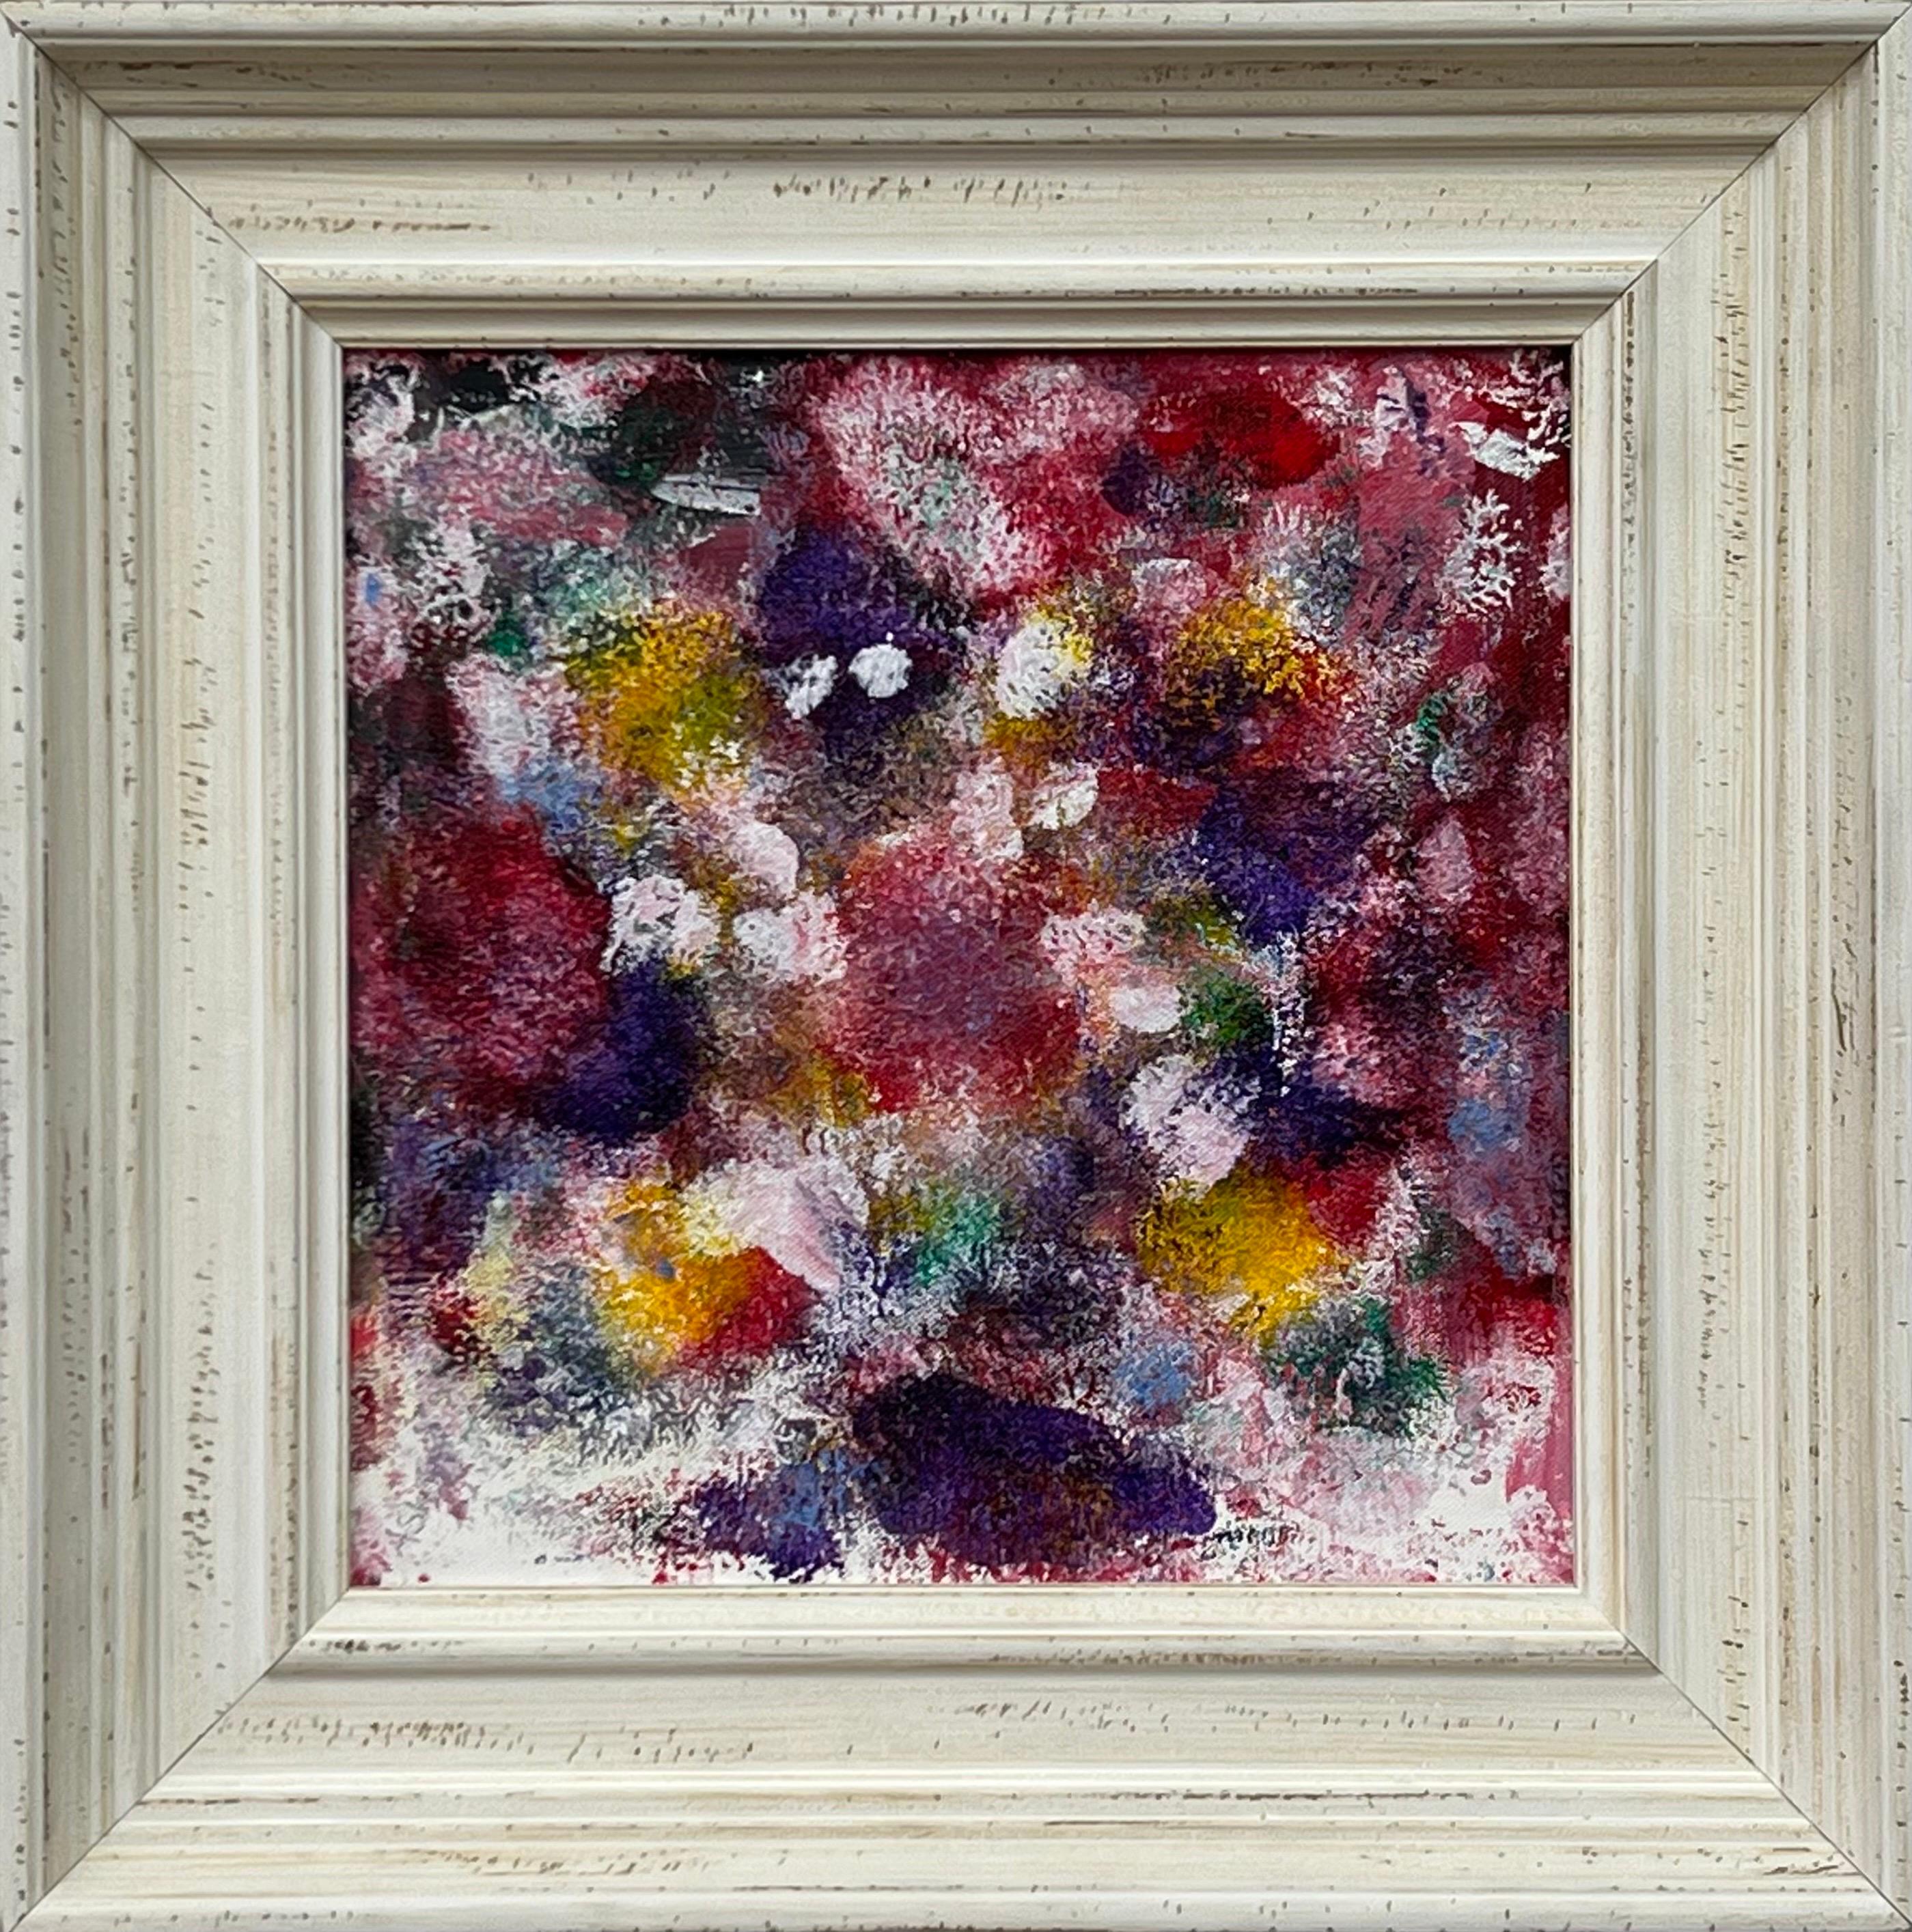 Abstract Red, Purple, White & Yellow Painting by British Contemporary Artist